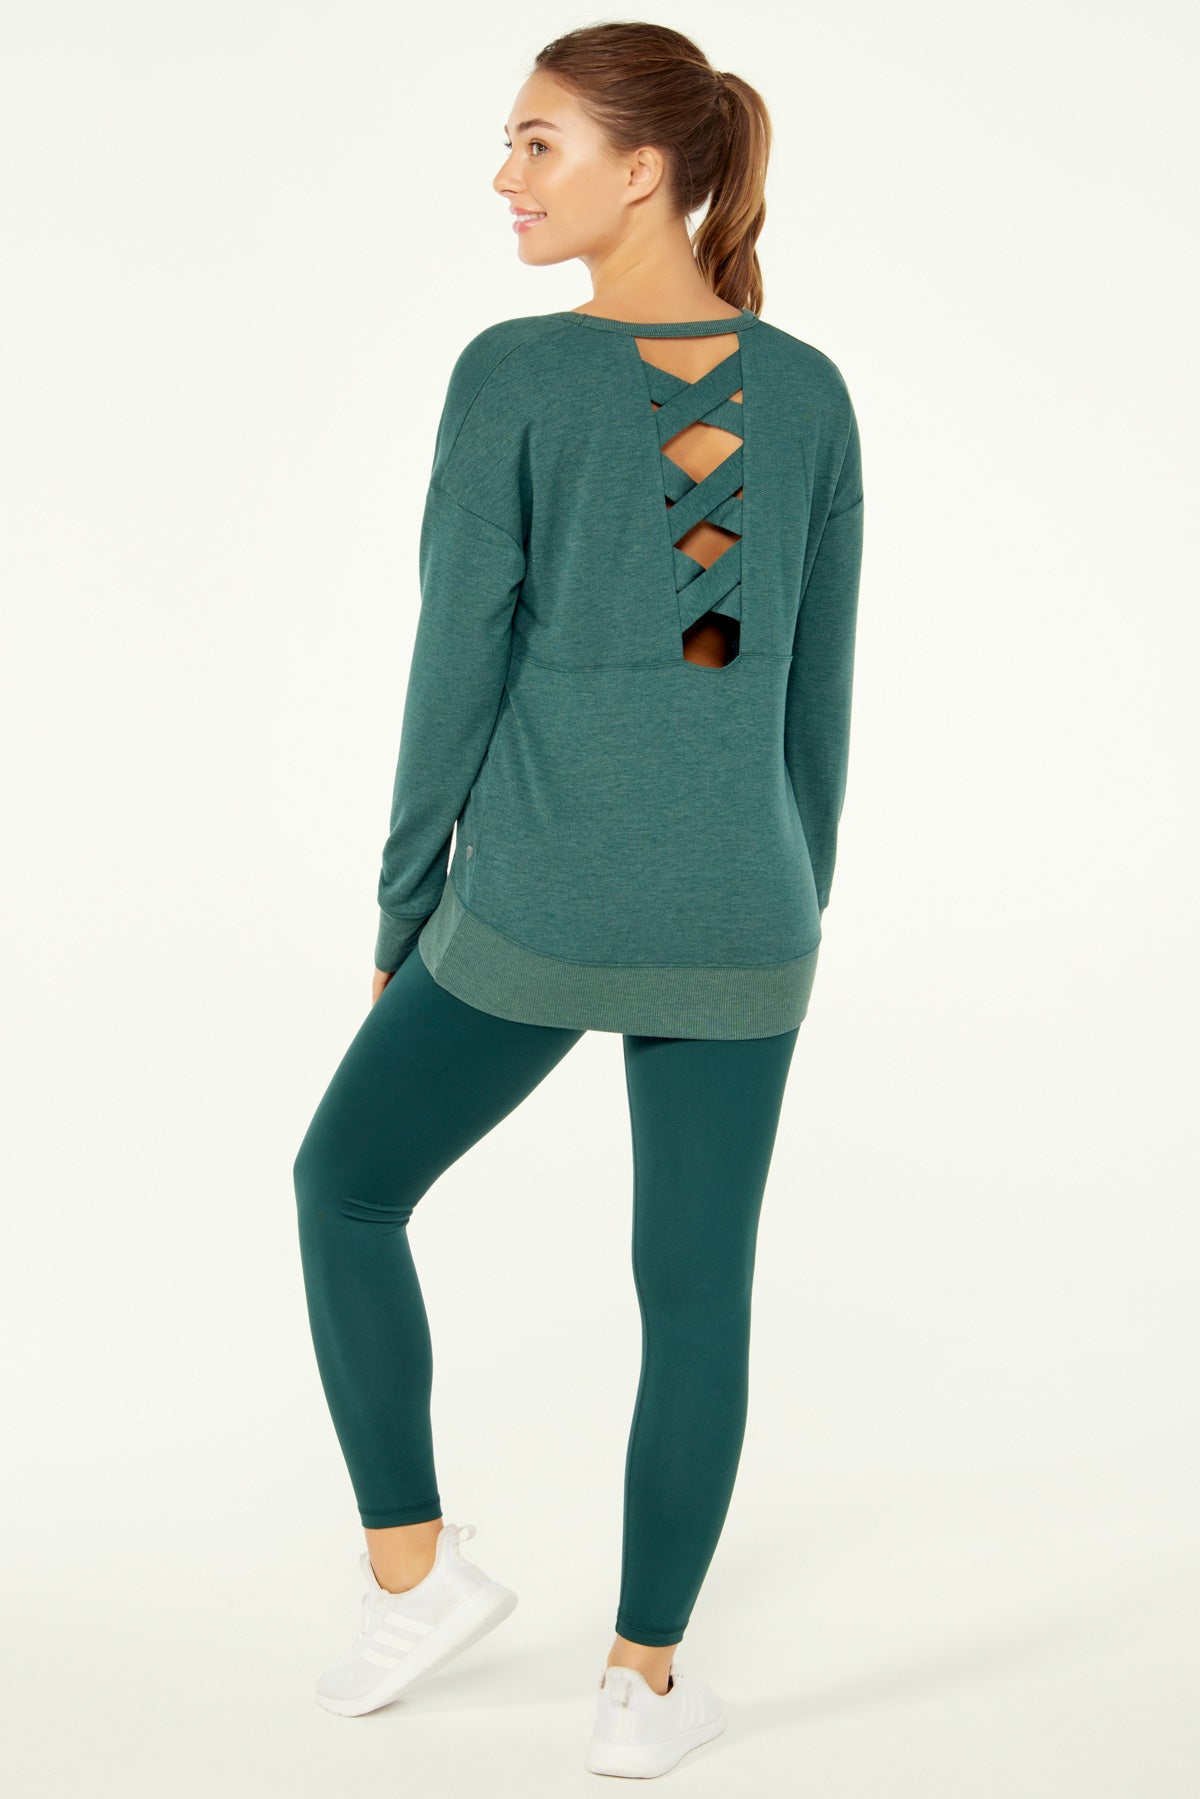 Olive Sculpt Luxe Long Sleeve Gym Top, Green, £21.00